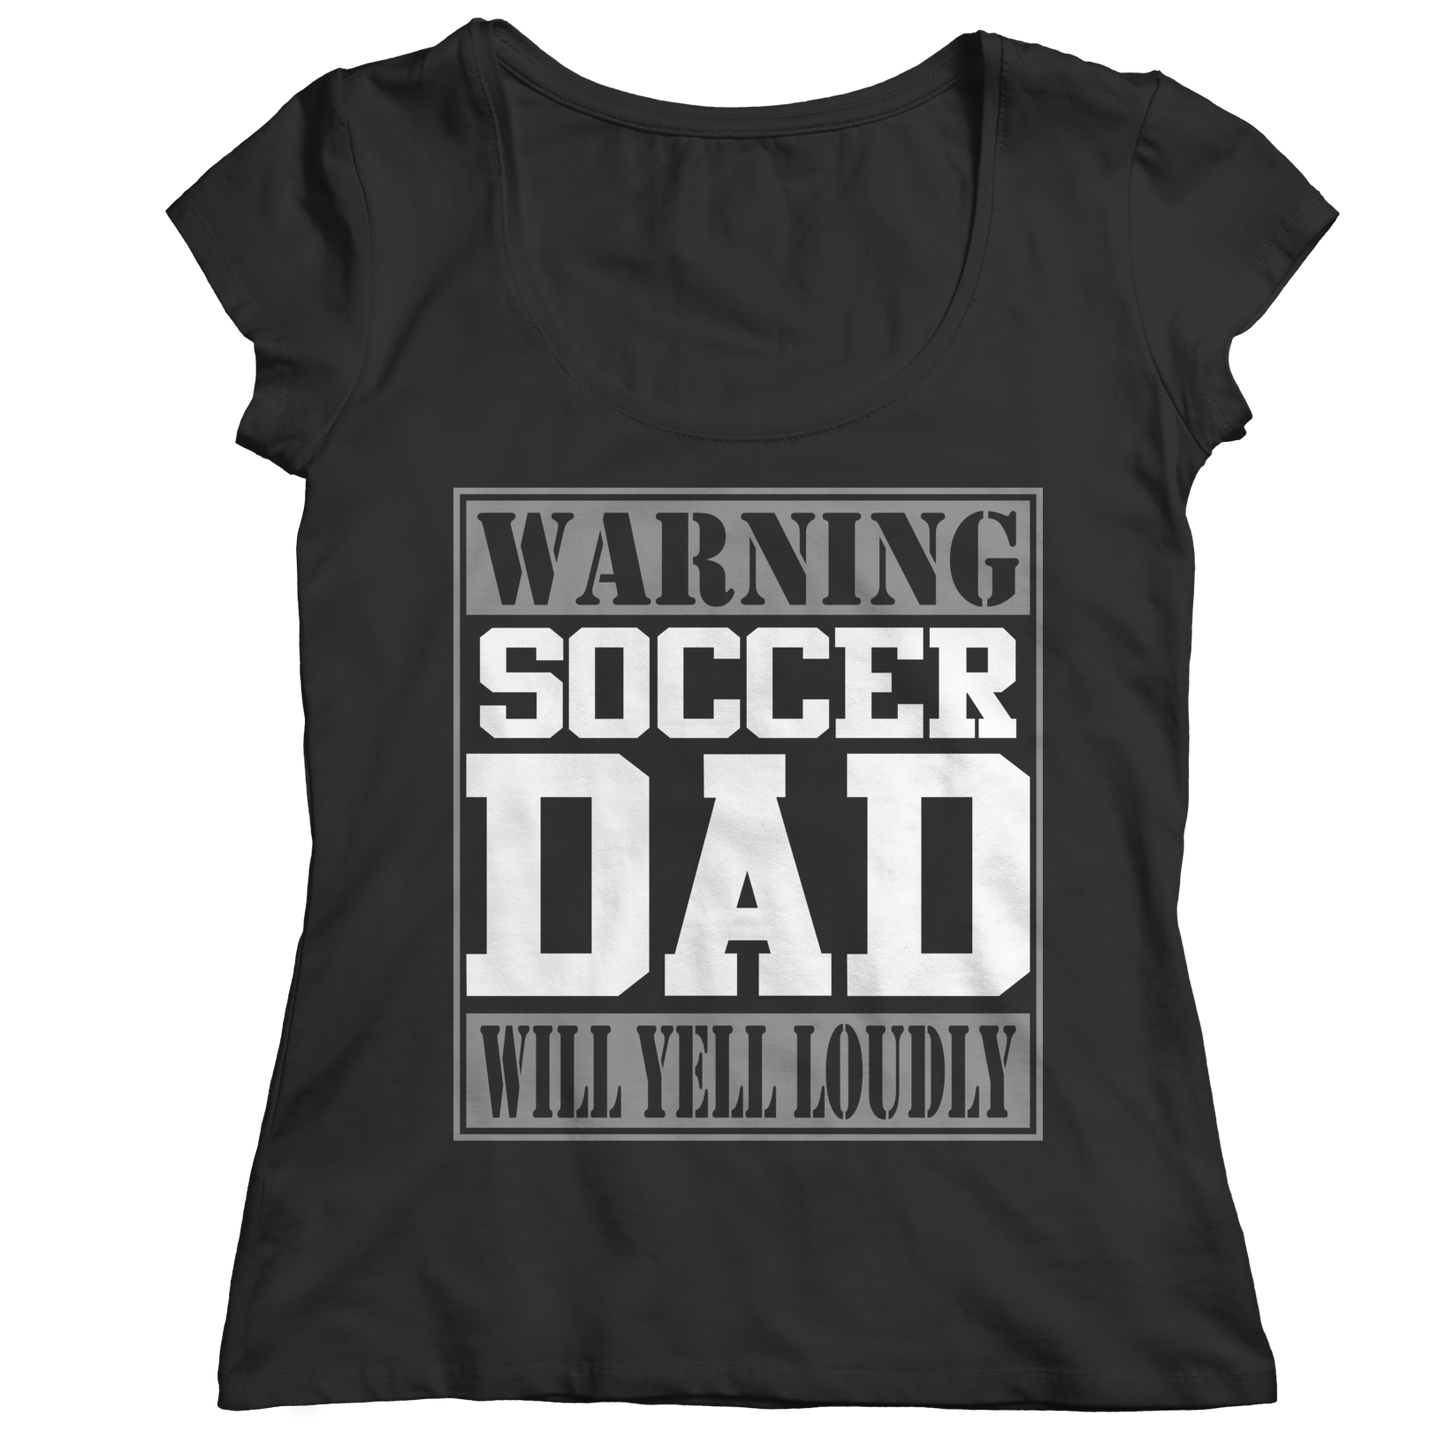 Limited Edition - Warning Soccer Dad Will Yell Loudly Shirt